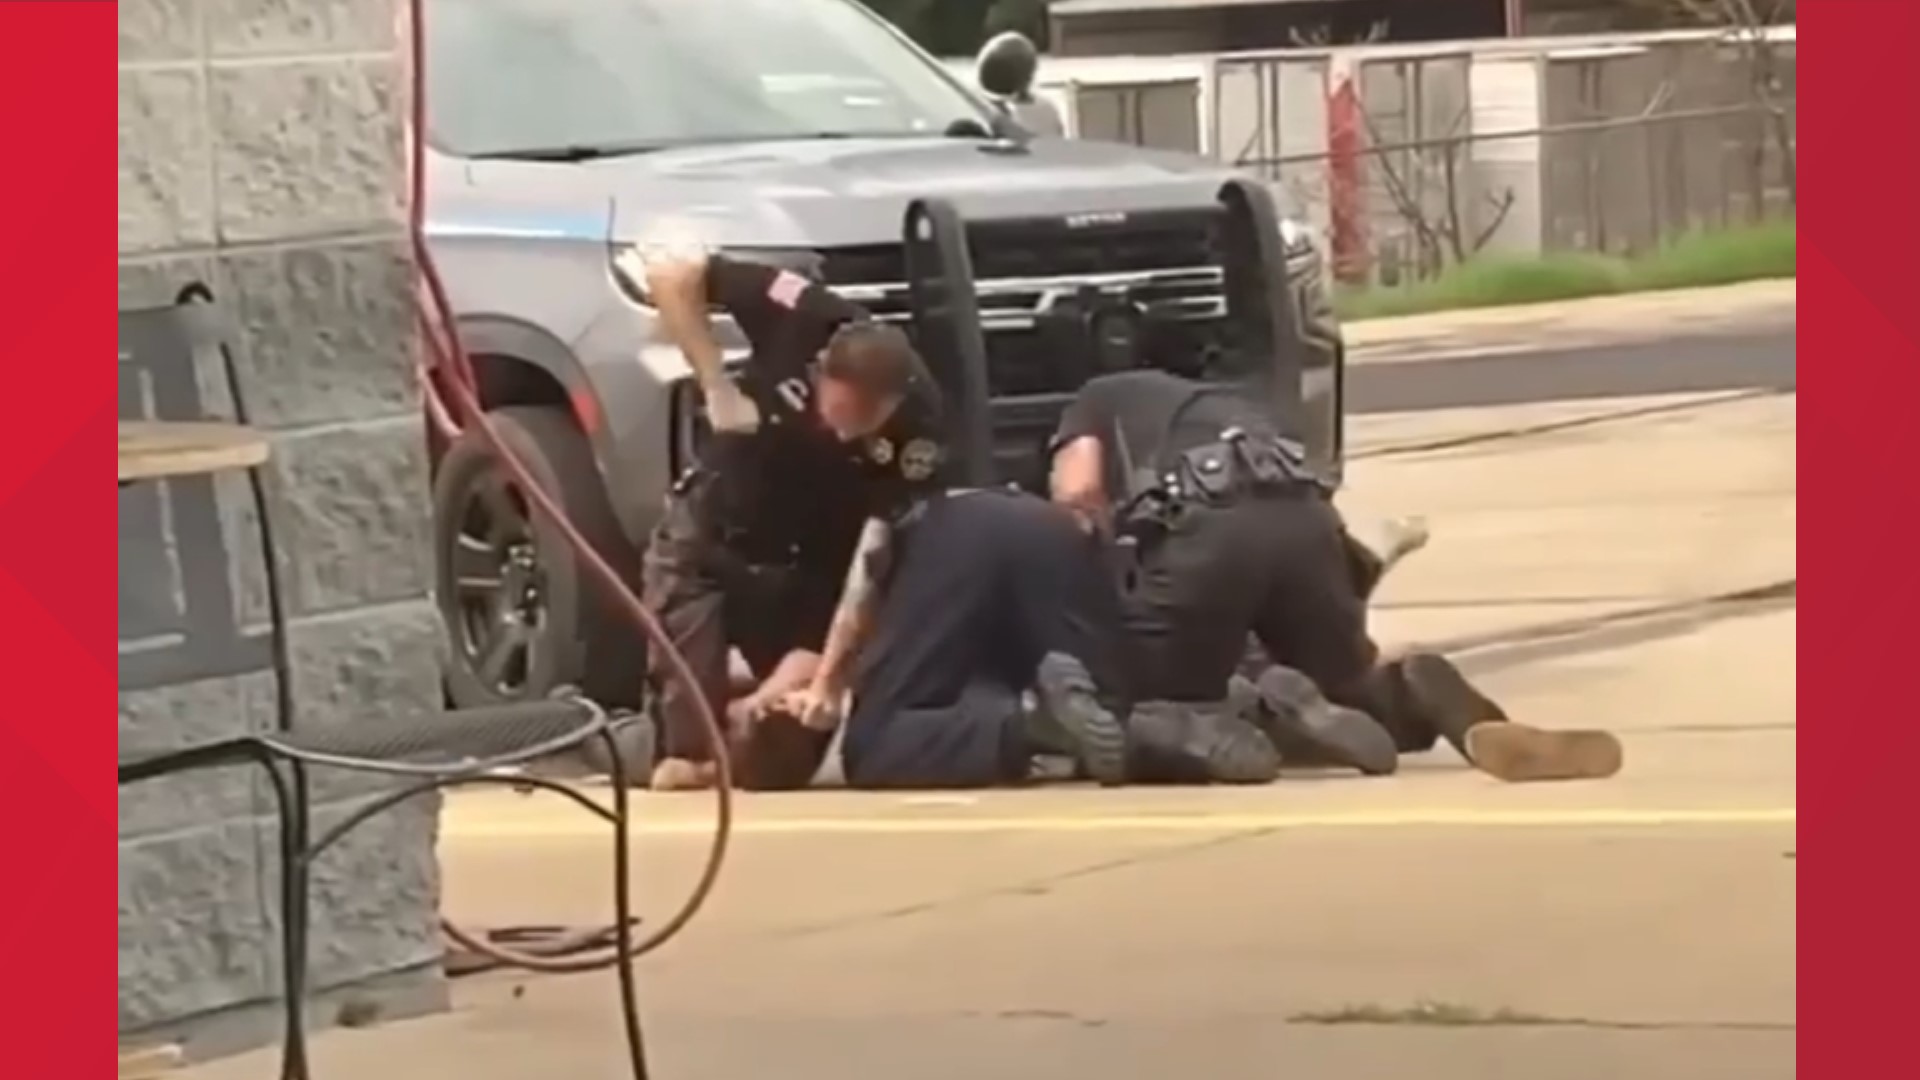 The public is calling for answers after three law enforcement officers were caught on video allegedly using force on a suspect in Mulberry, Arkansas.